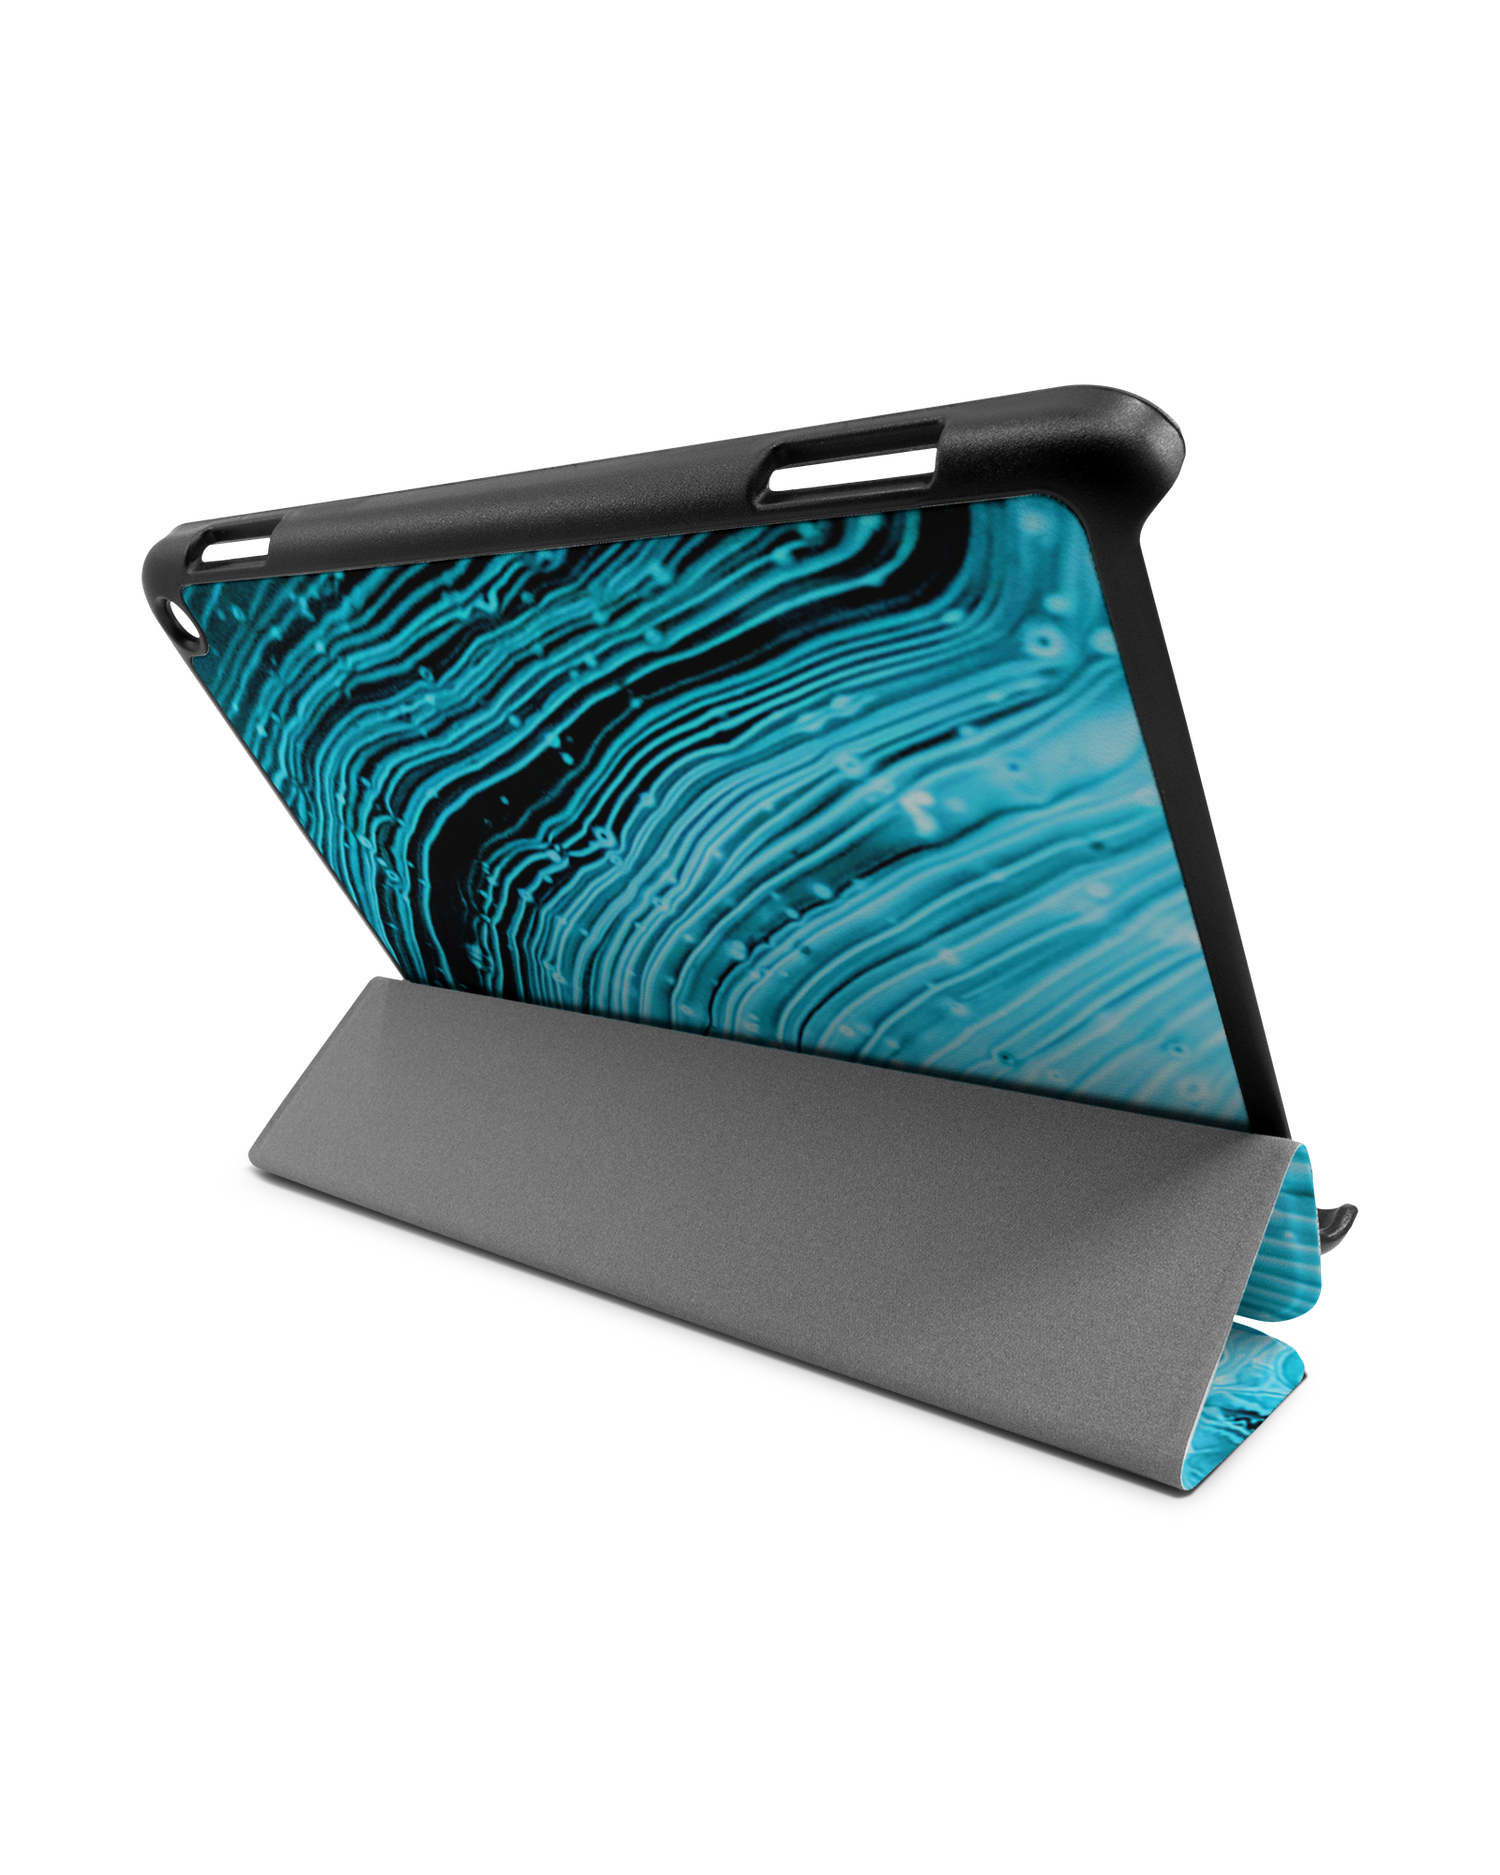 Turquoise Ripples Tablet Smart Case for Amazon Fire HD 8 (2022), Amazon Fire HD 8 Plus (2022), Amazon Fire HD 8 (2020), Amazon Fire HD 8 Plus (2020): Used as Stand